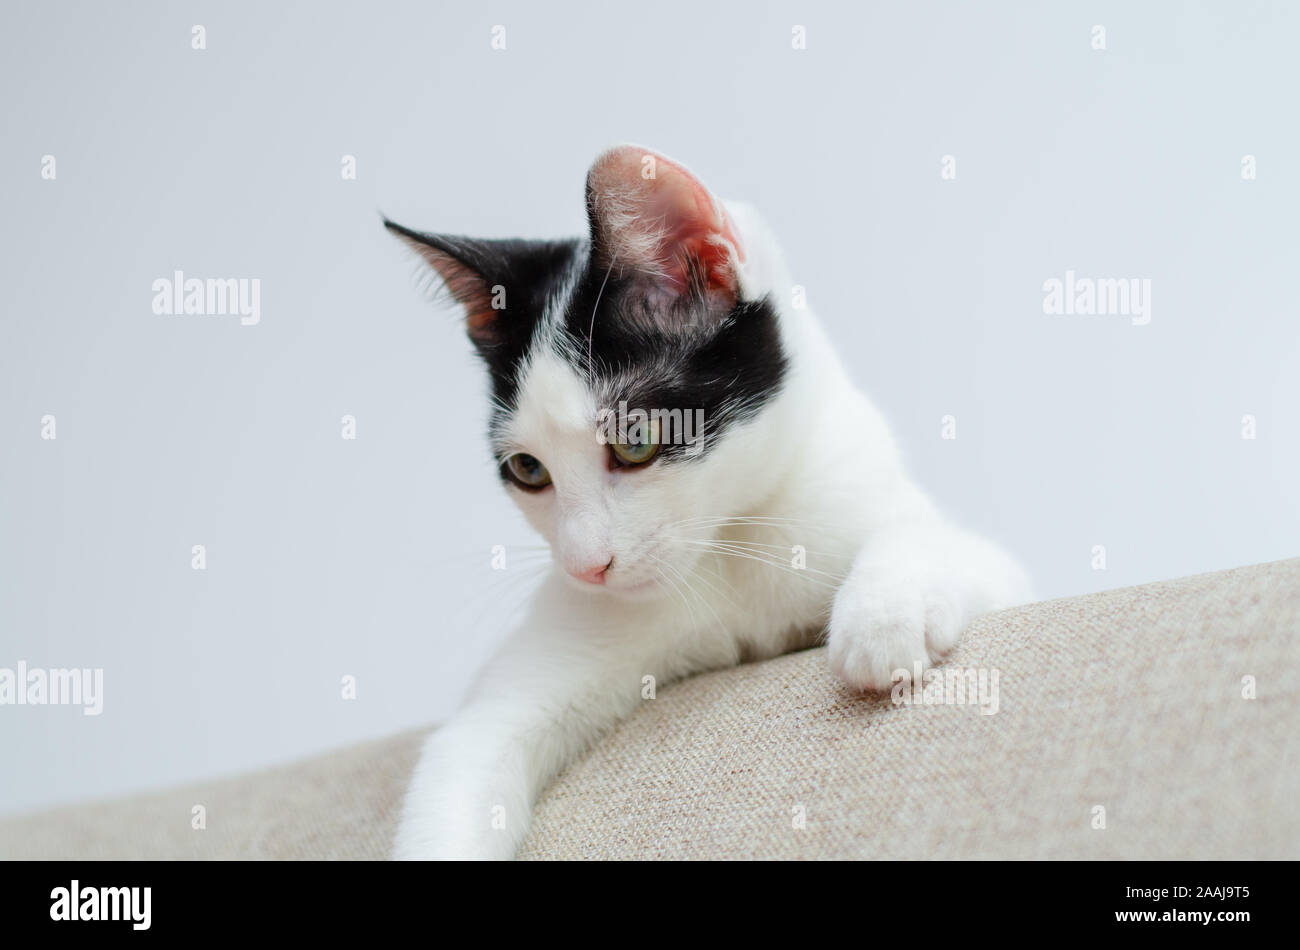 Cat watching closely Stock Photo